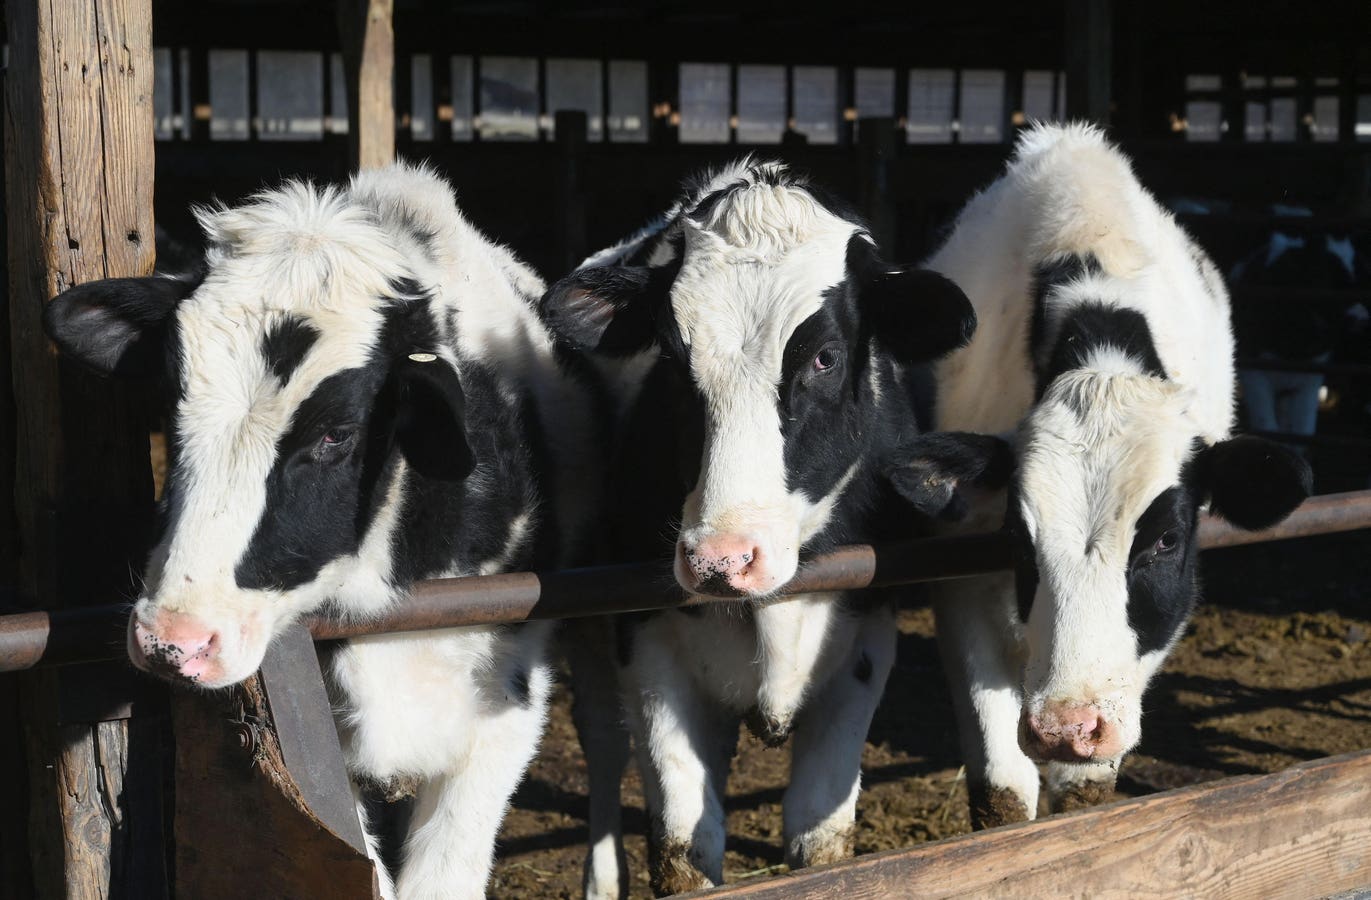 Avian Influenza In Cattle And A Person Prompts Health Advisory From CDC